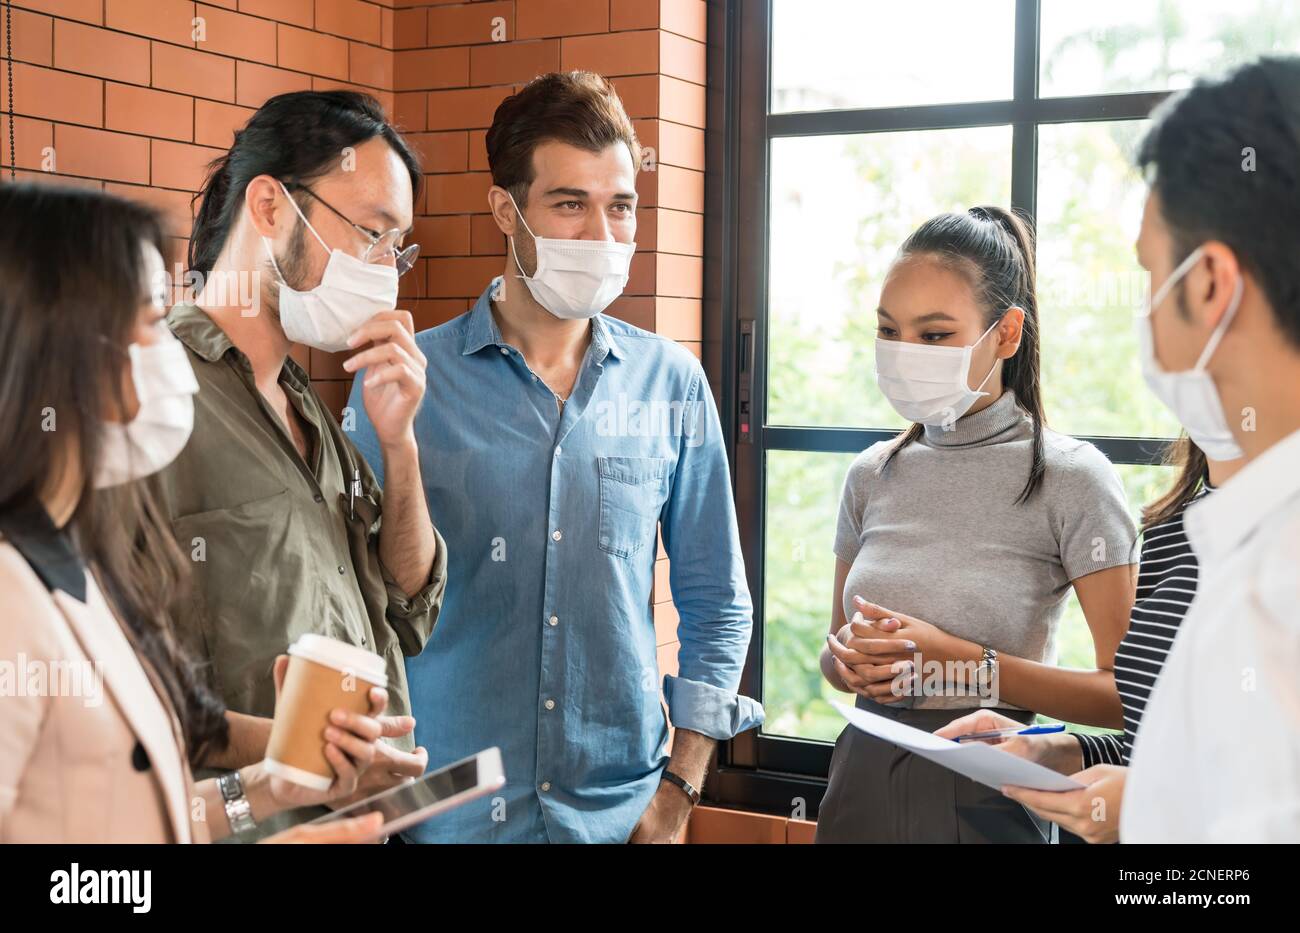 Businee person discussion meeting with face mask. Stock Photo